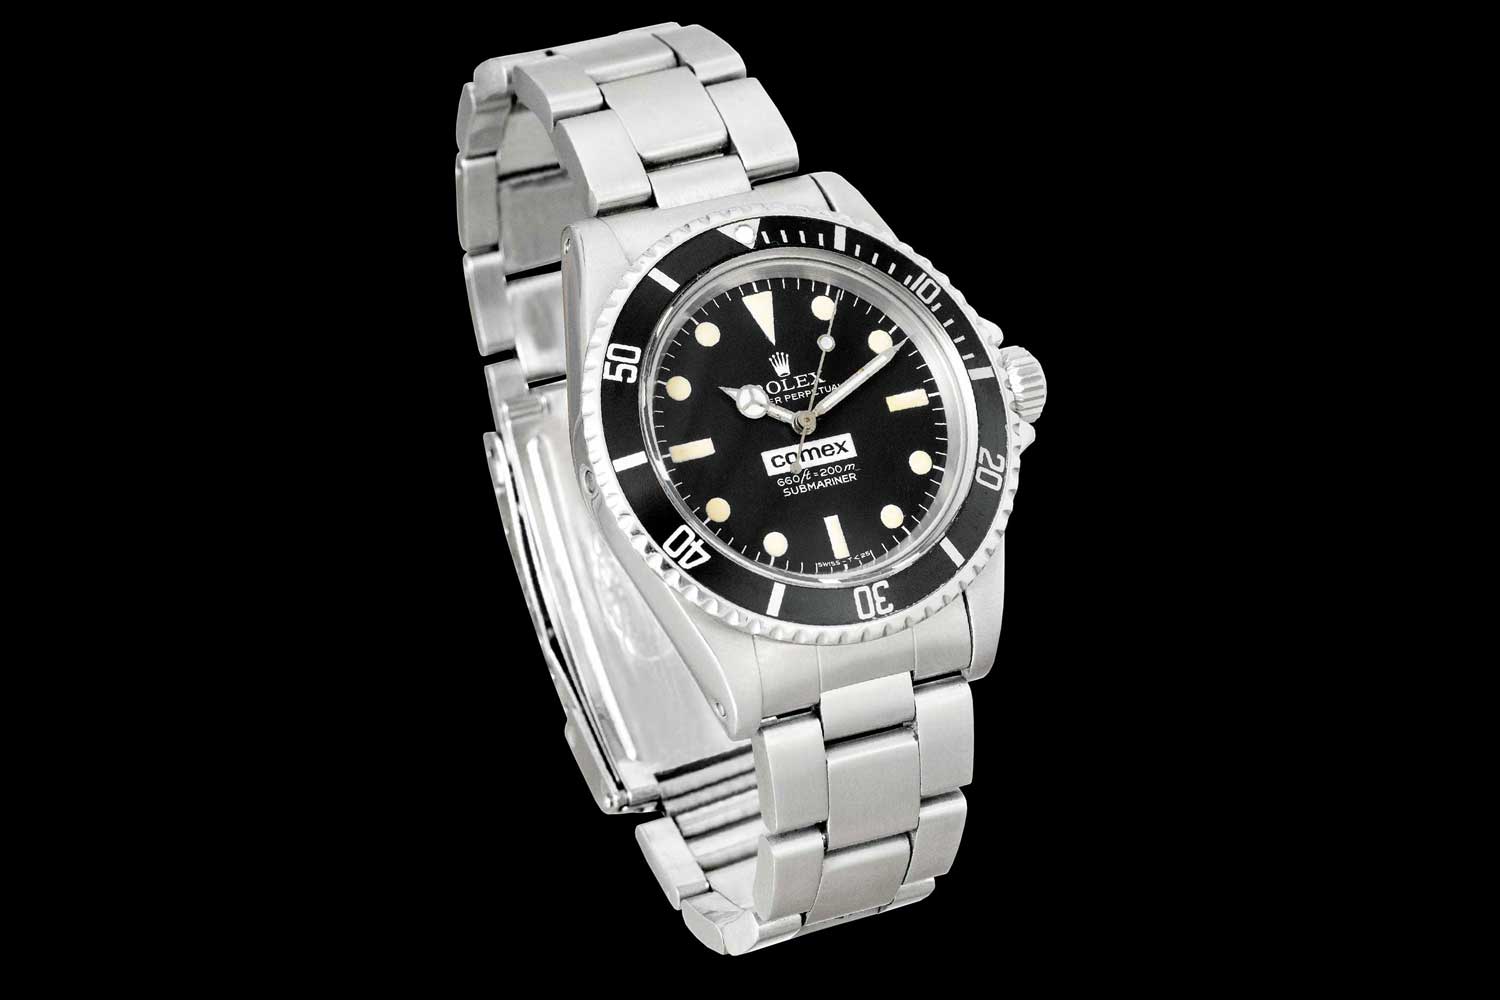 Rolex Submariner featuring the helium escape valve developed with COMEX for saturation diving